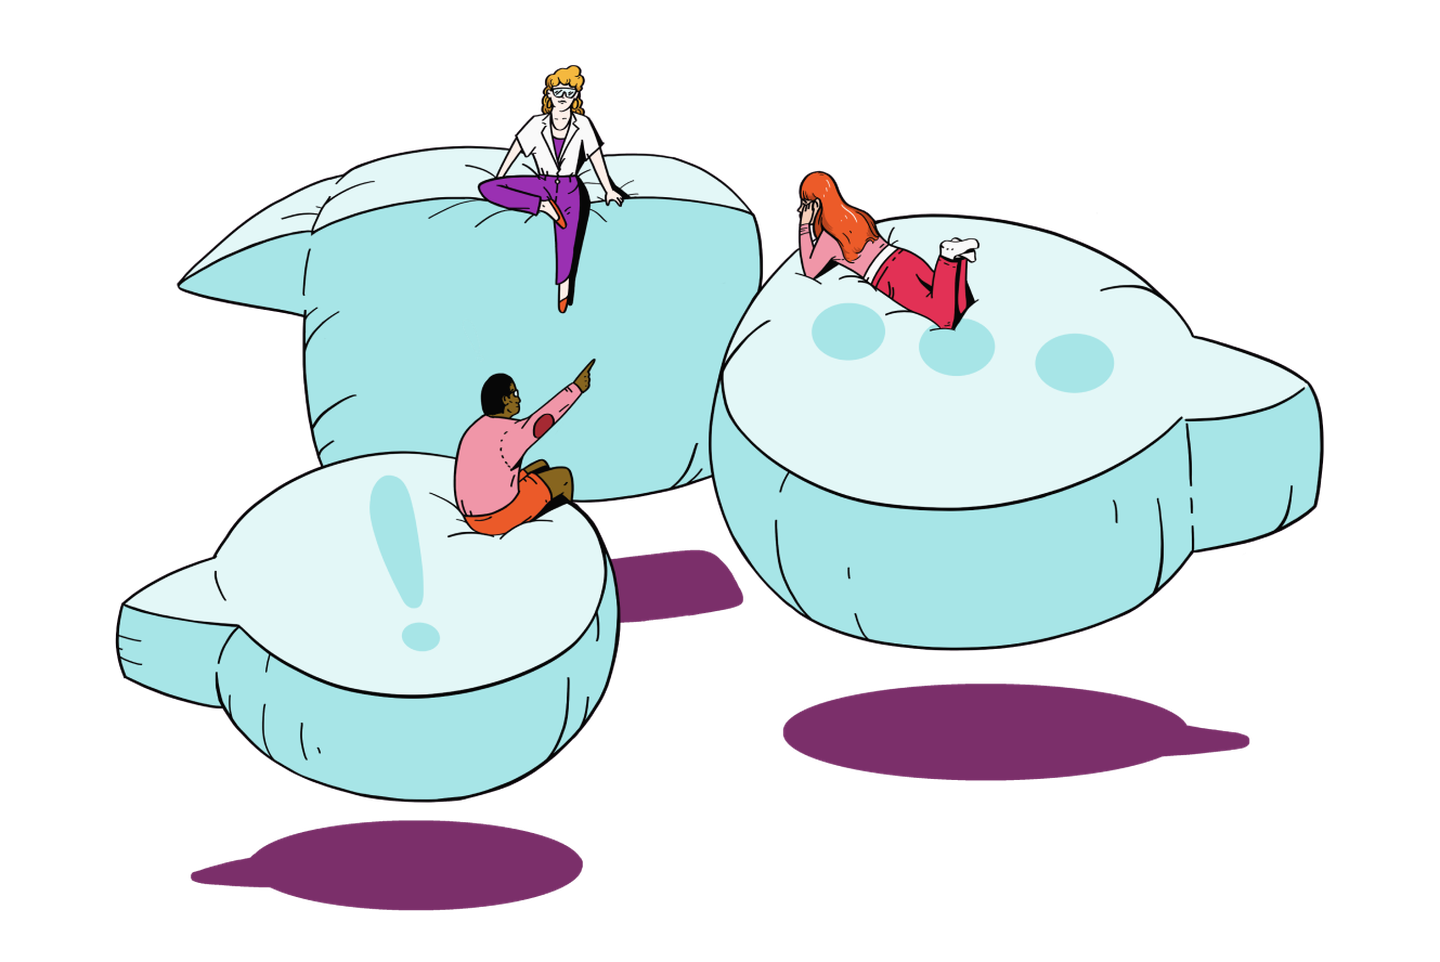 Illustration of a group of community members chatting on floating balloons shaped like chat bubbles